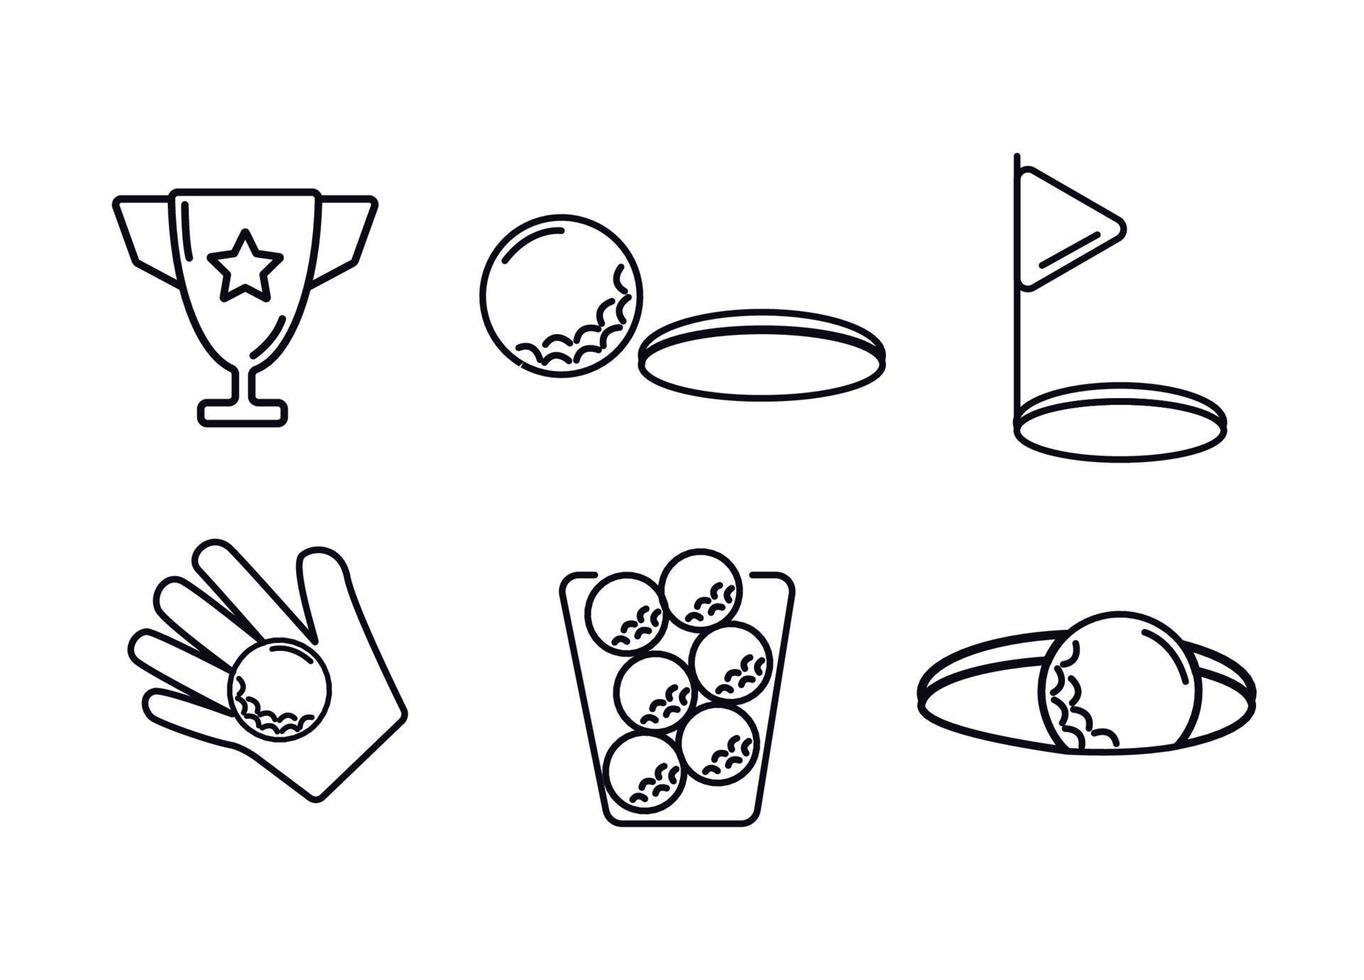 Golf icons. Golf badges. Golf icons set black and white. Flagpole near the hole. The ball near the hole. Cup. Trophy. The ball on the glove. Basket with balls. The ball in the hole vector